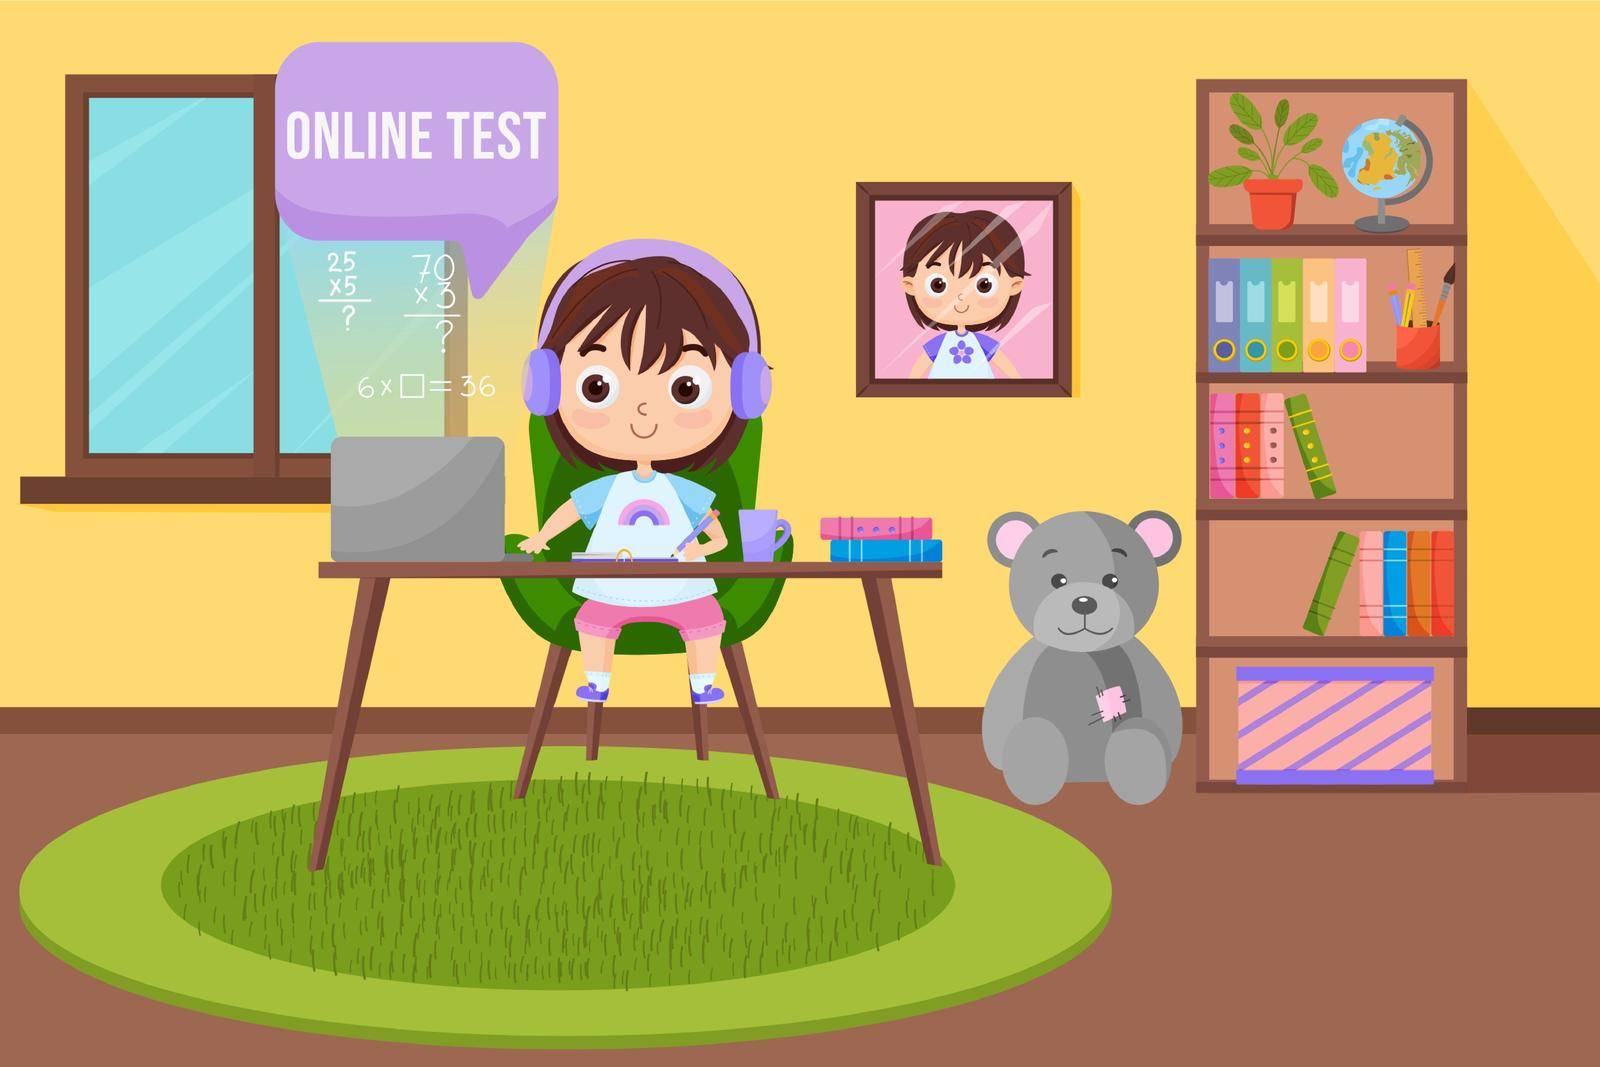 Kids learning online test. Online test at home, distance learning concept. Premium vector